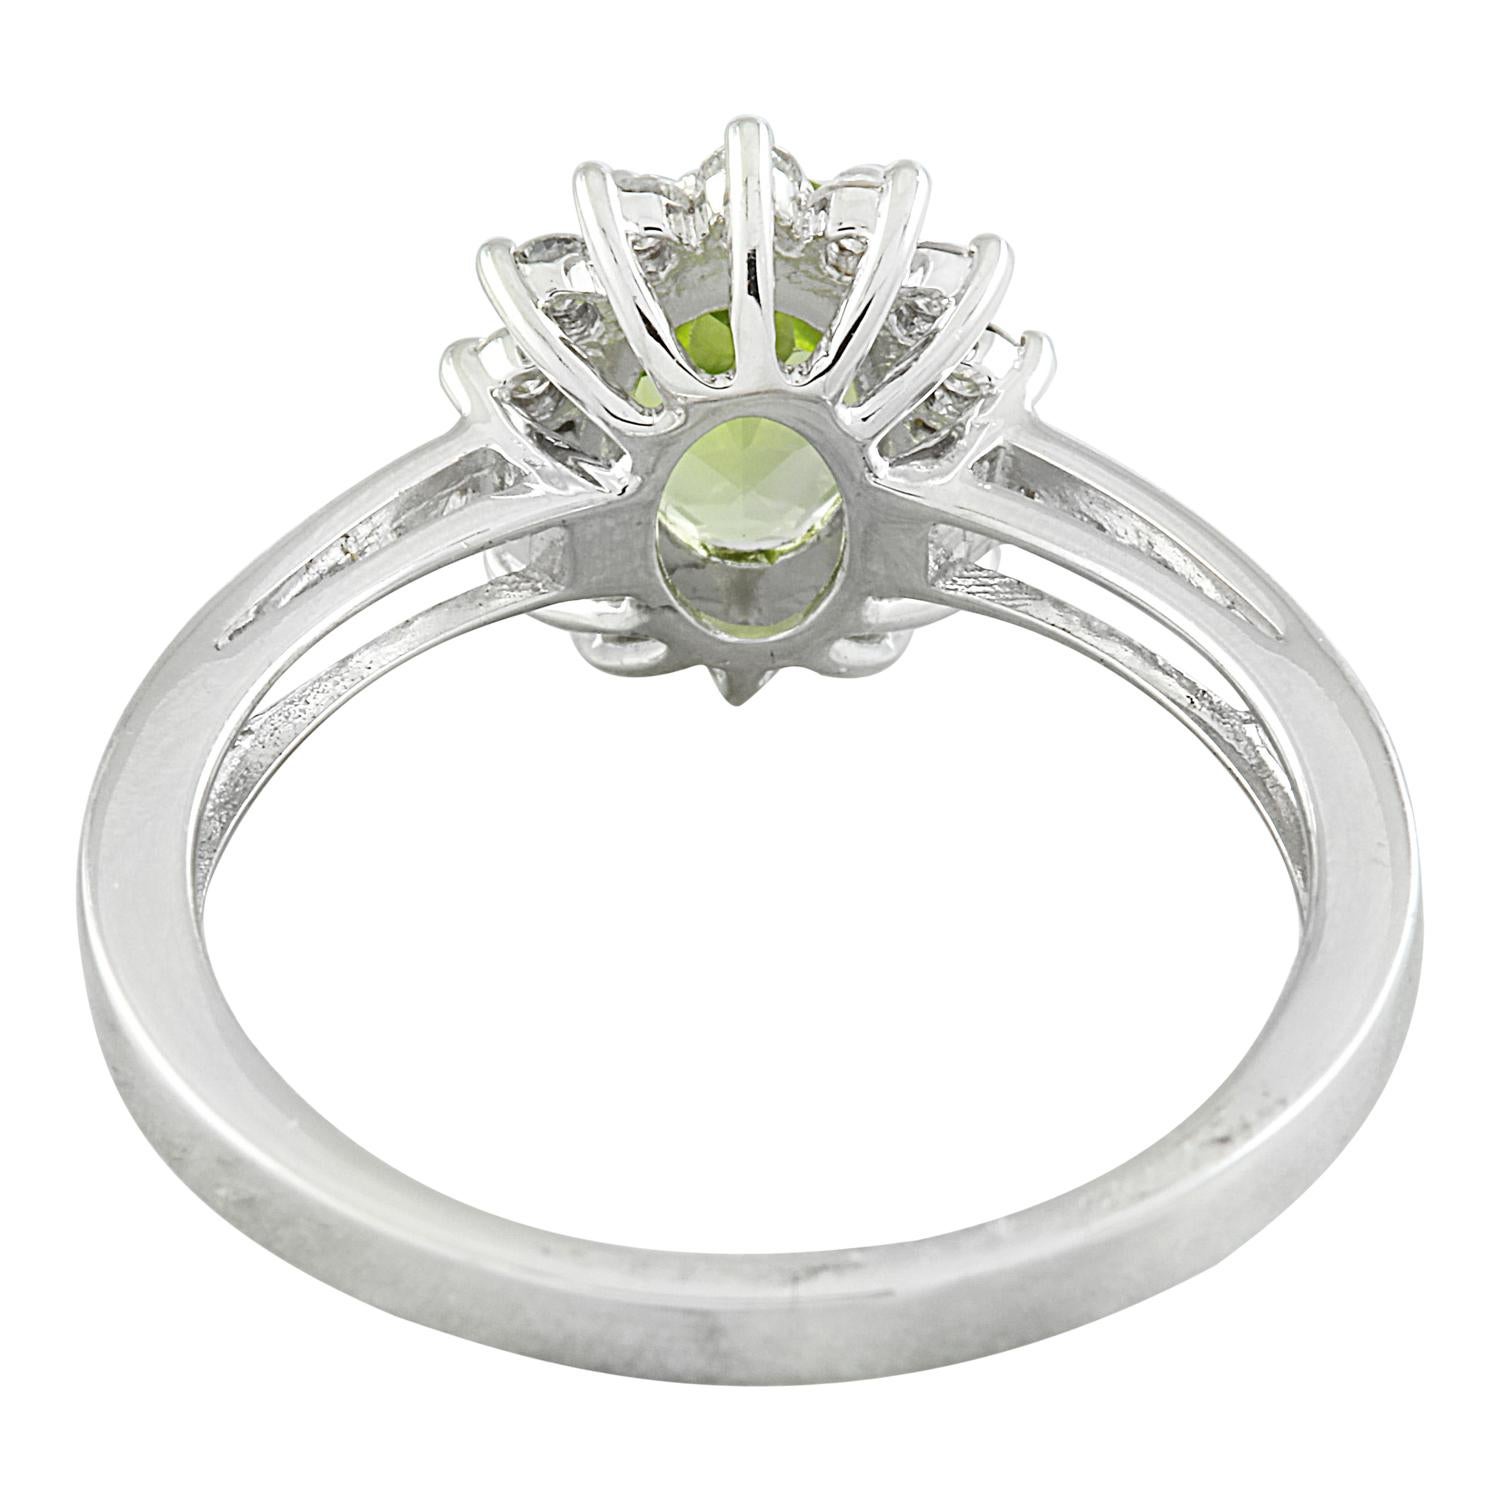 Oval Cut Natural Peridot Diamond Ring: Exquisite Beauty in 14K Solid White Gold For Sale